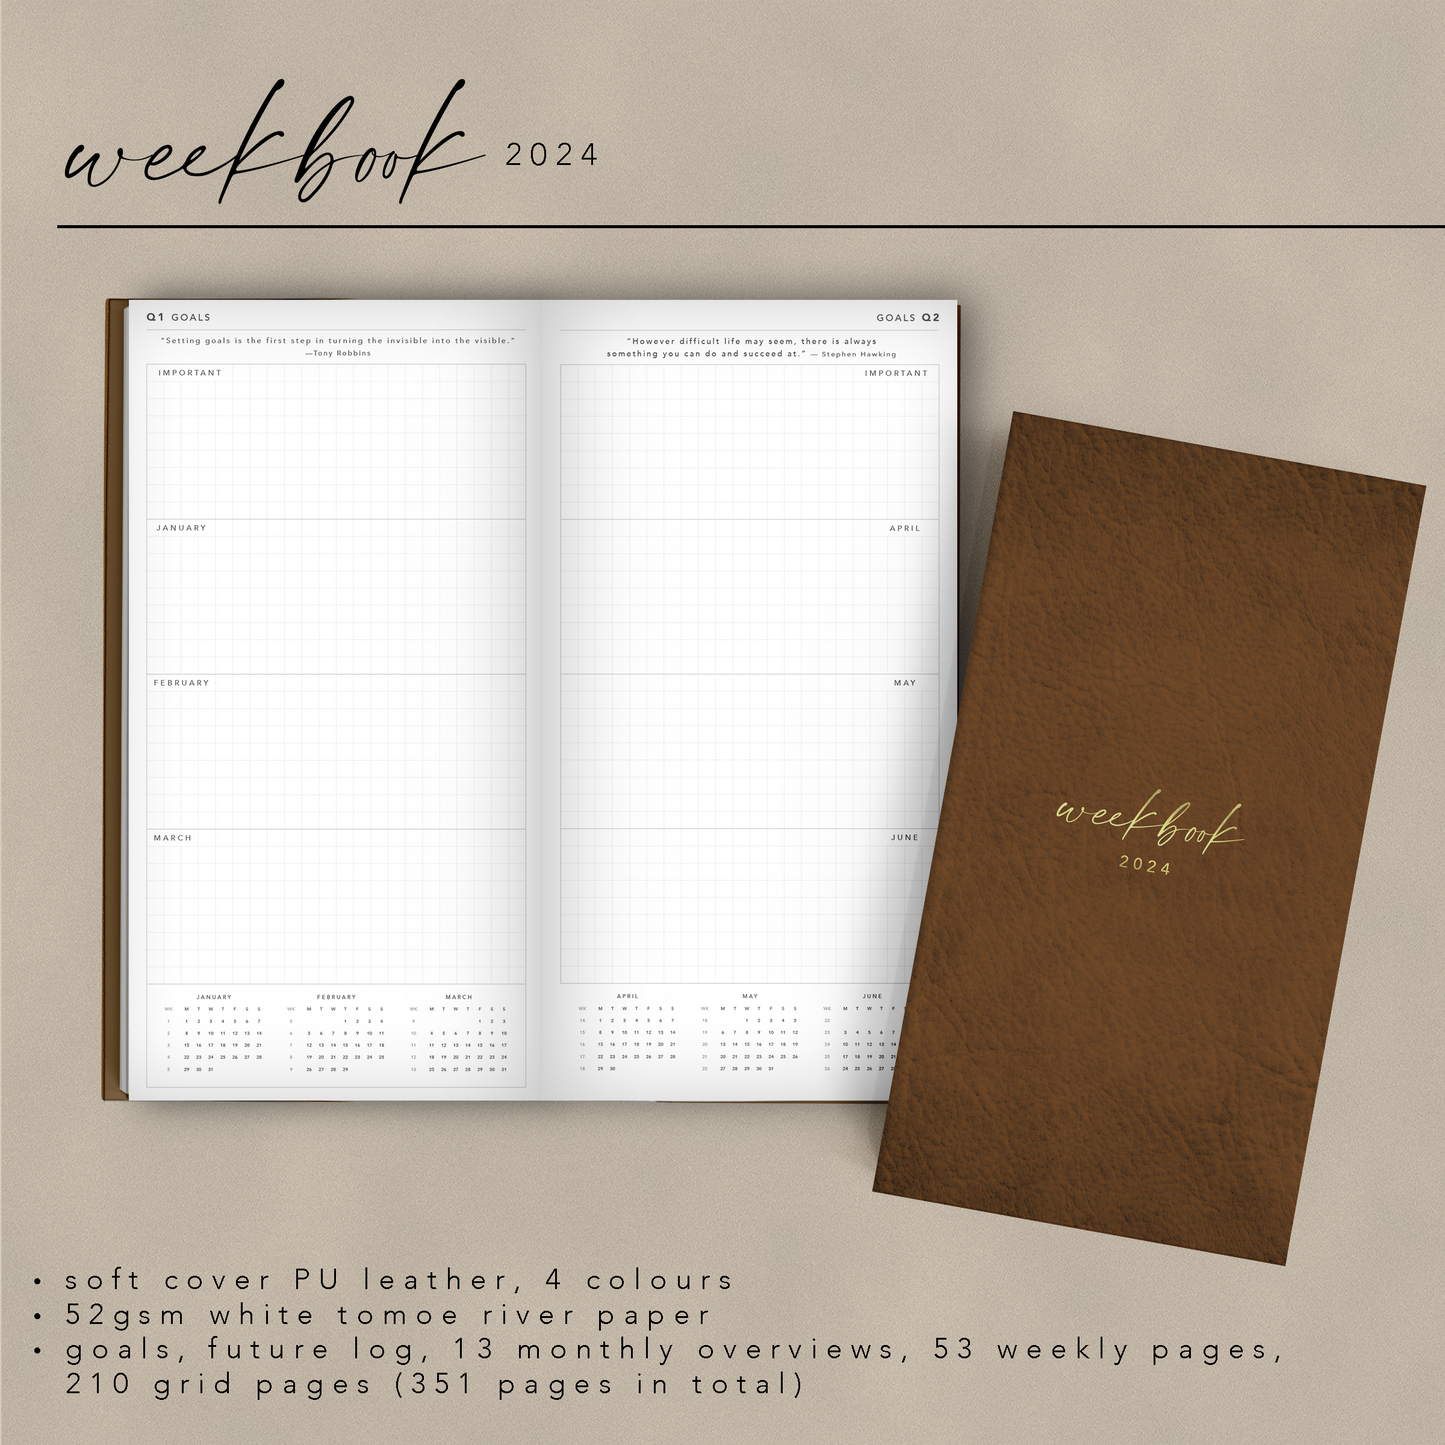 PREORDER Weekbook 2025 • Softcover Book Bound • Tomoe River Paper